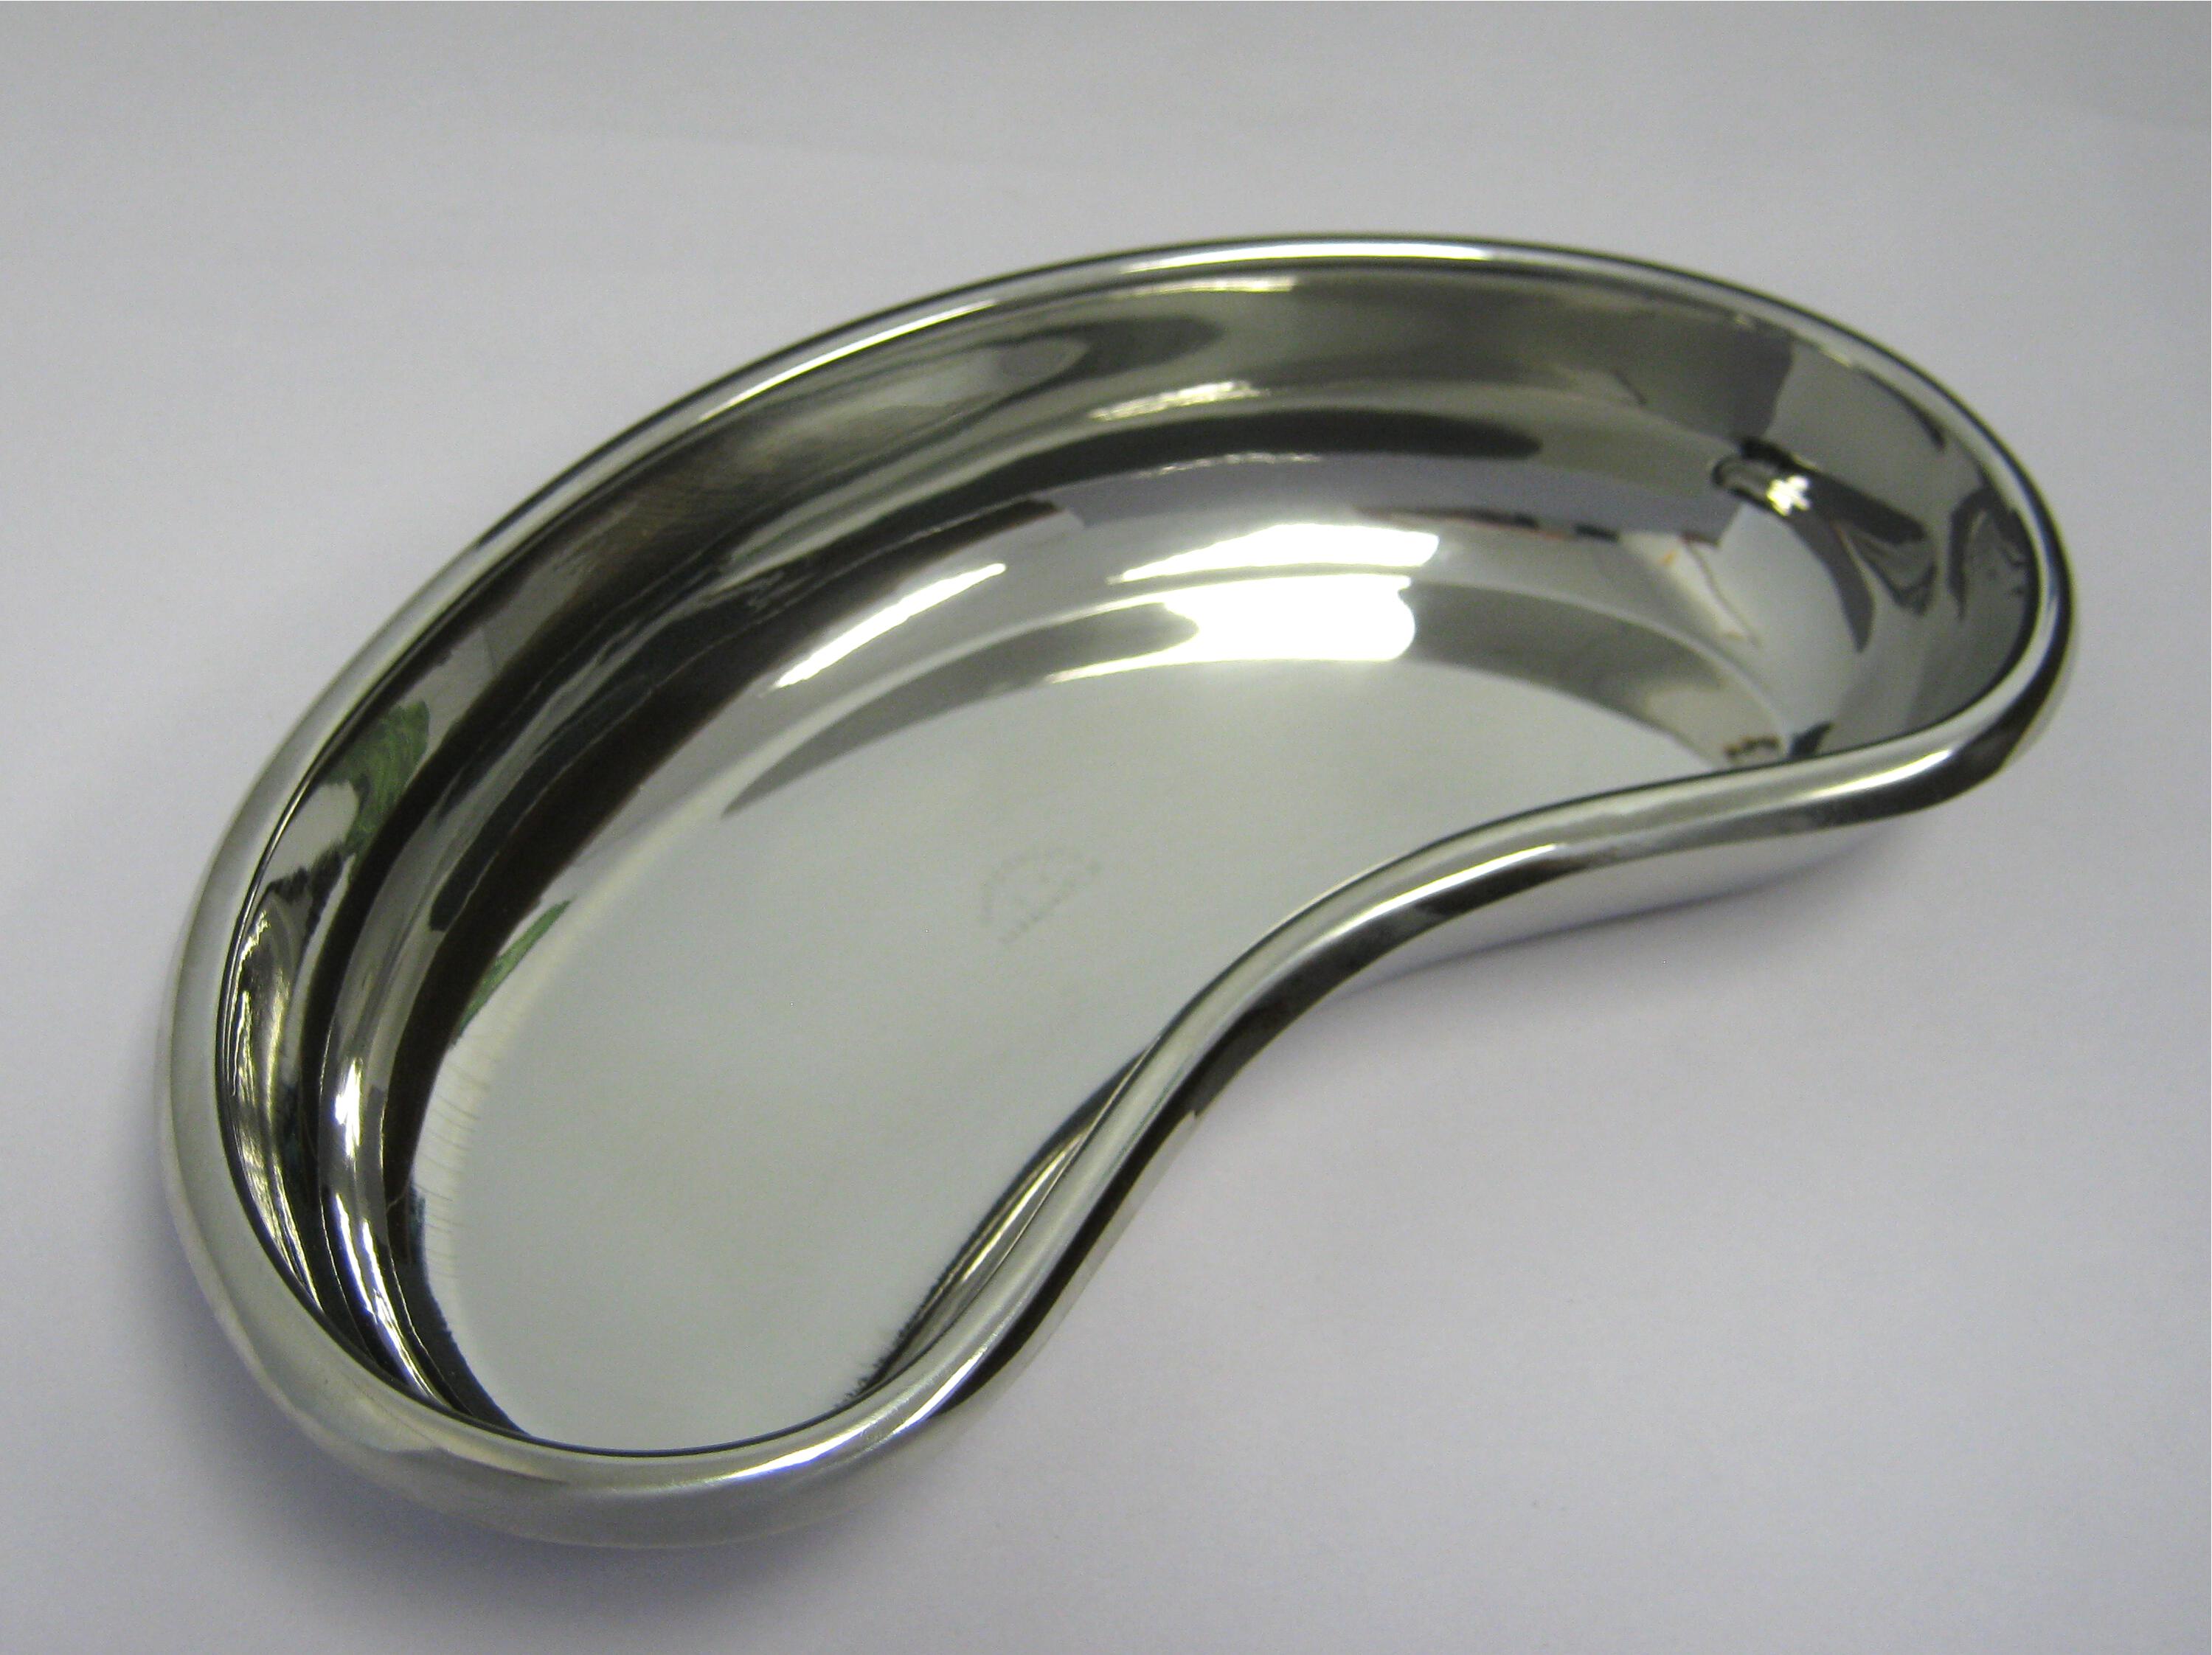 Kidney Tray Stainless Steel